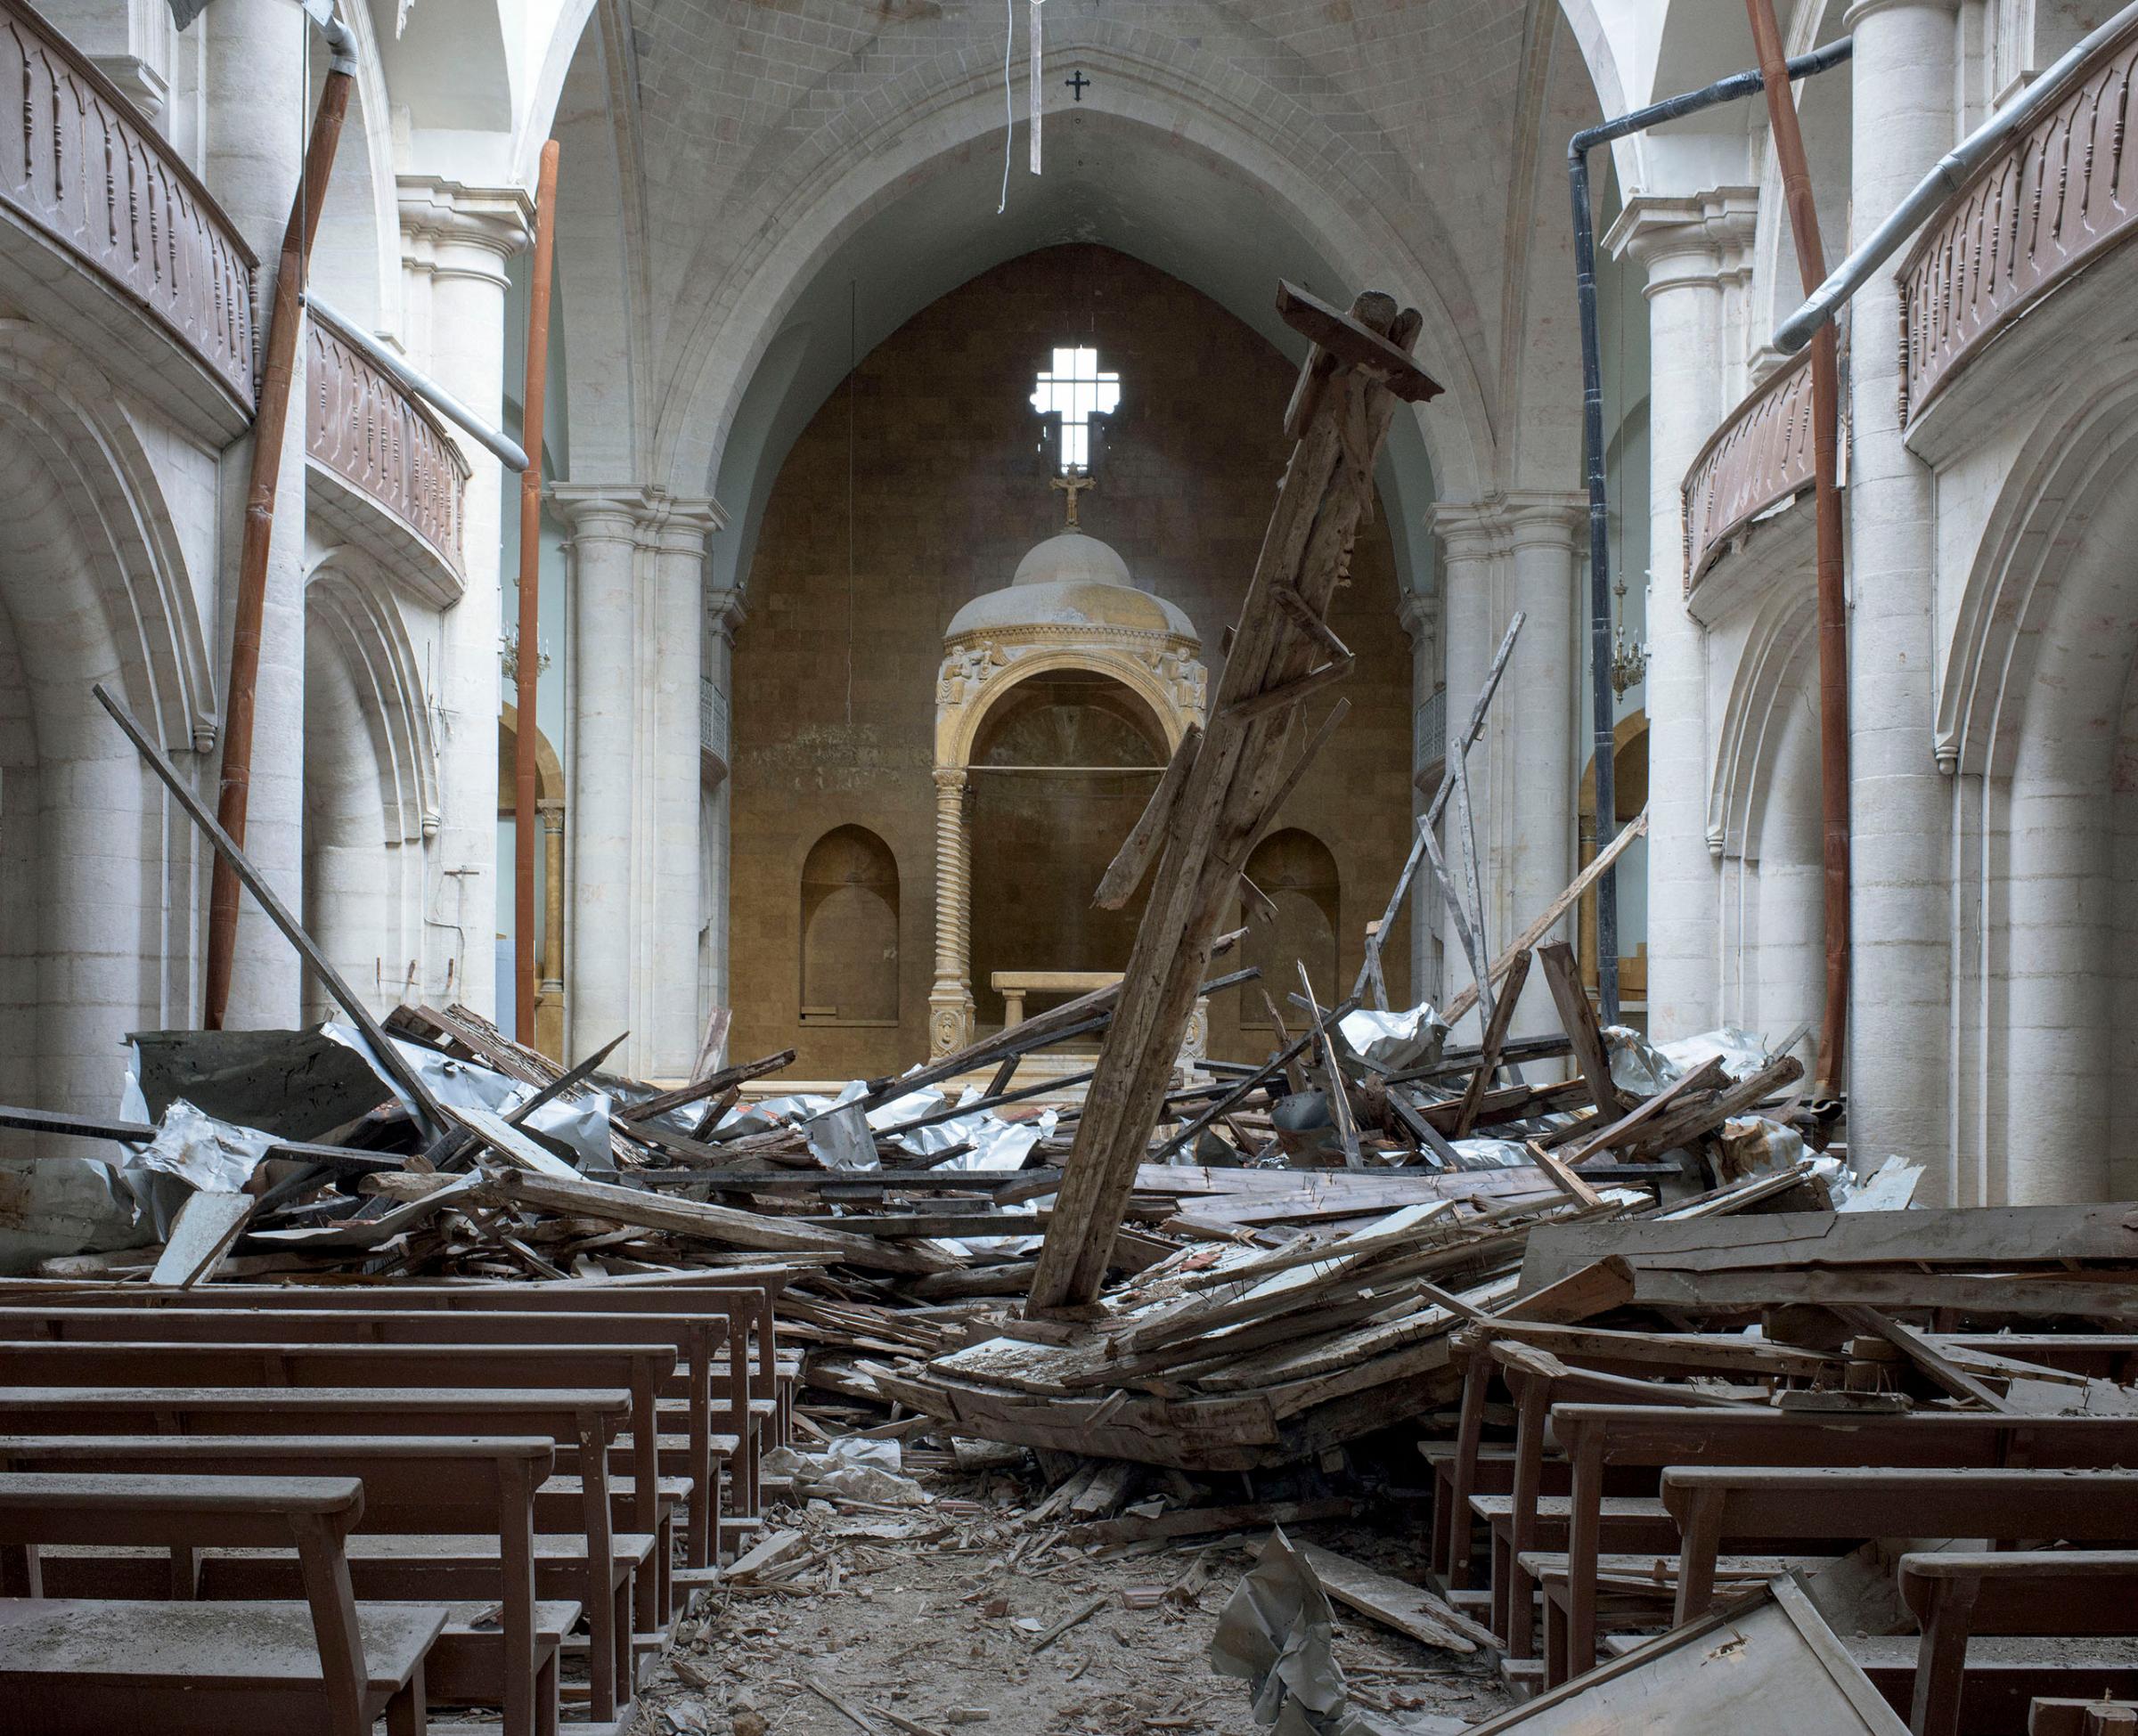 Destruction inside the former Maronite Cathedral of Aleppo, Syria, March 2016.